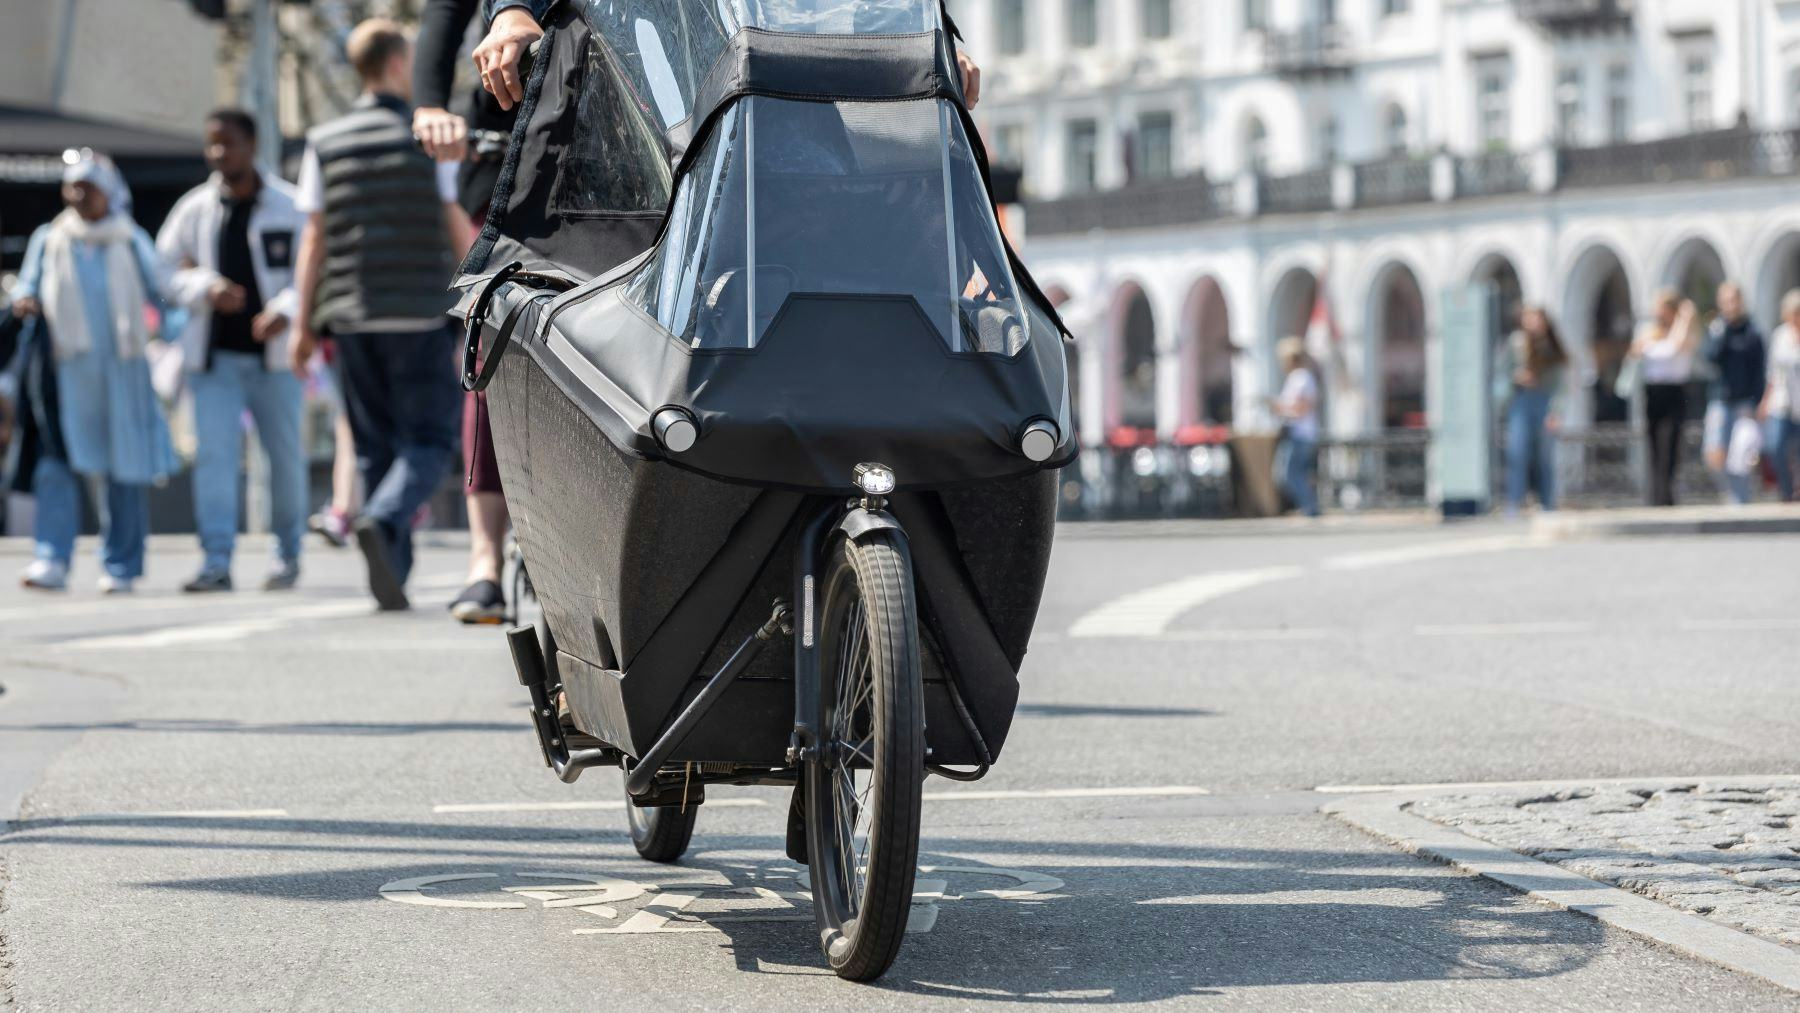 CCCB has been successful in bringing together 20 partners to stimulate the large-scale deployment of cargo bikes as a sustainable mobility option. – Photo Shutterstock